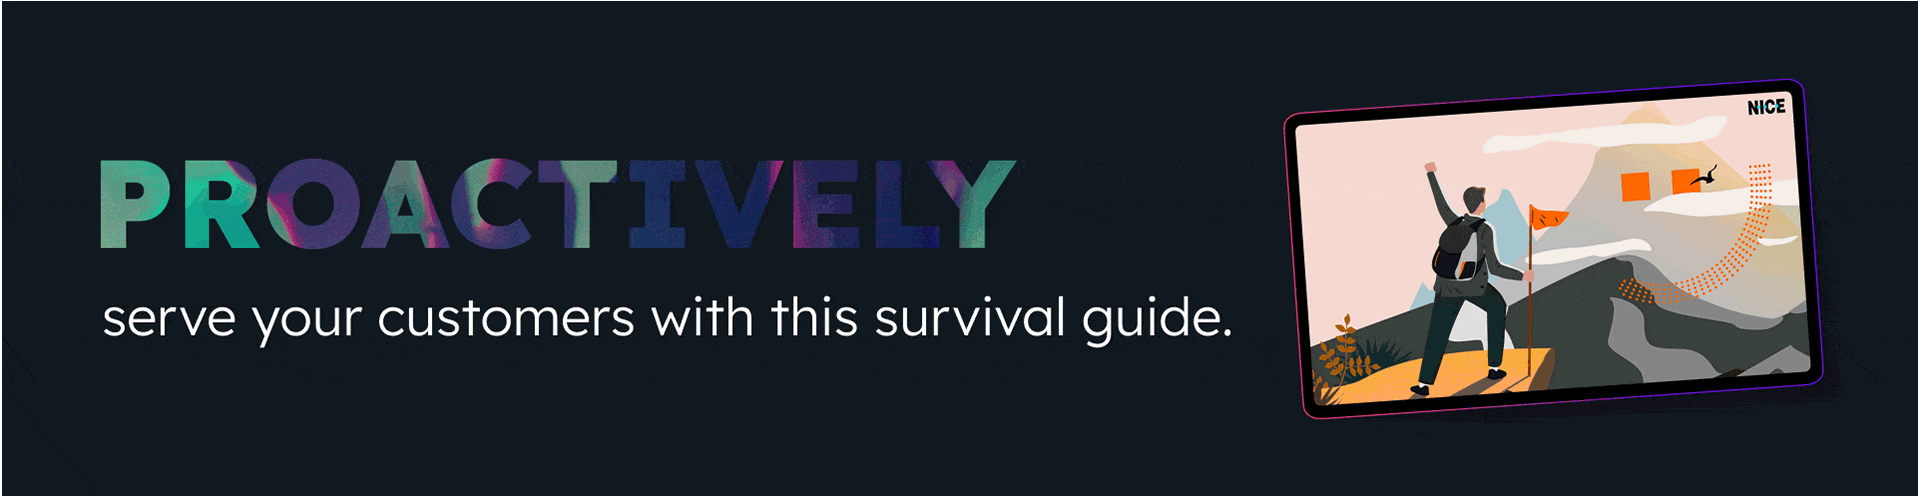 Proactively serve your customers with this survival guide